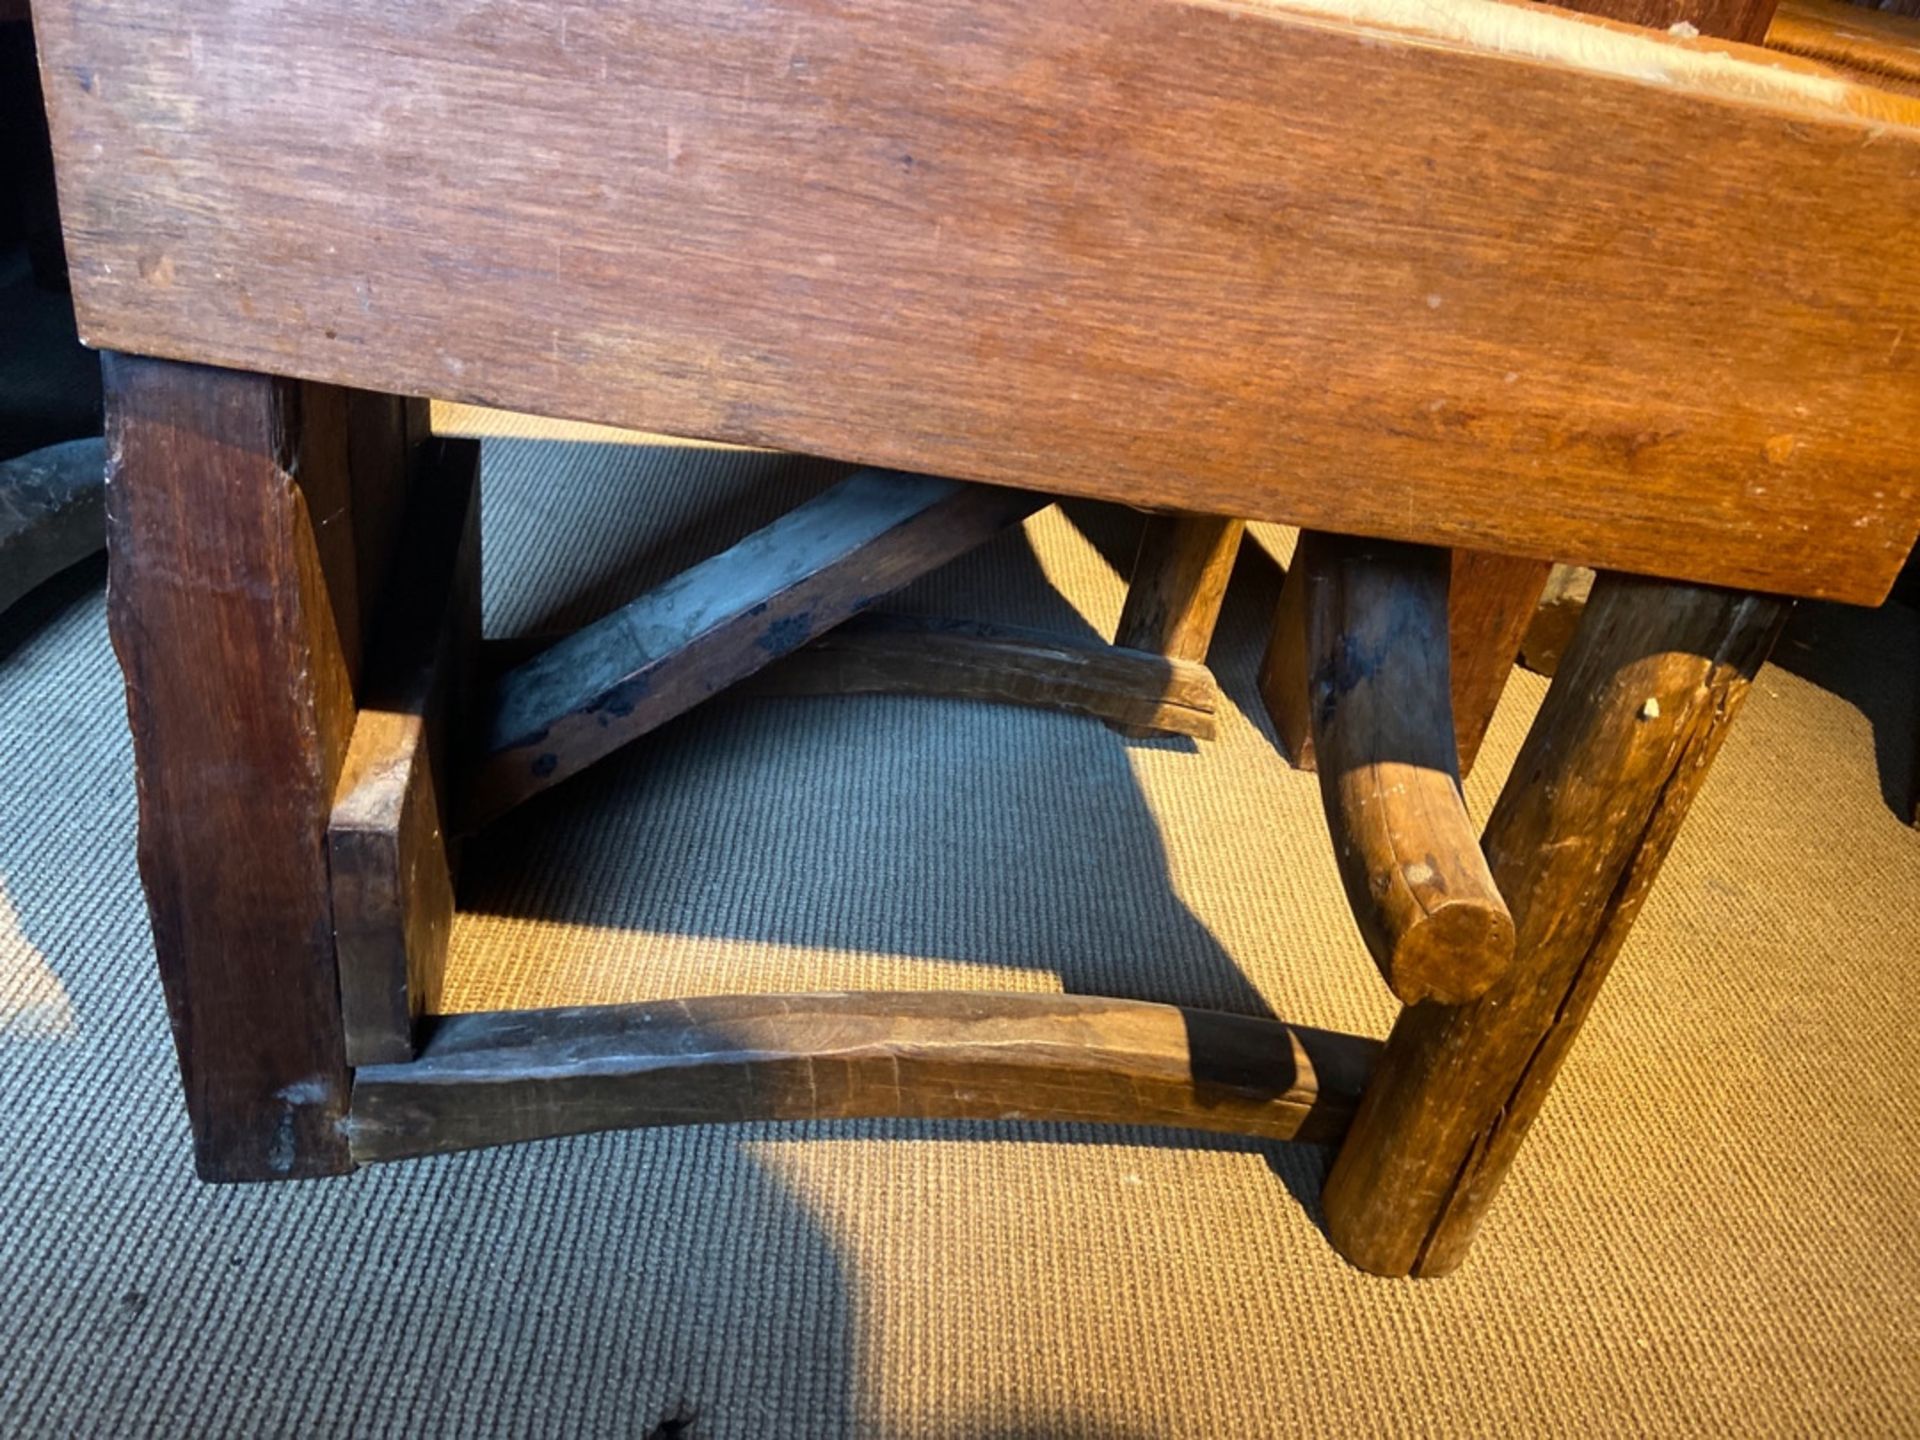 Banquet Solid Wooden Table & 10 Railway Sleeper Chairs - Image 10 of 11